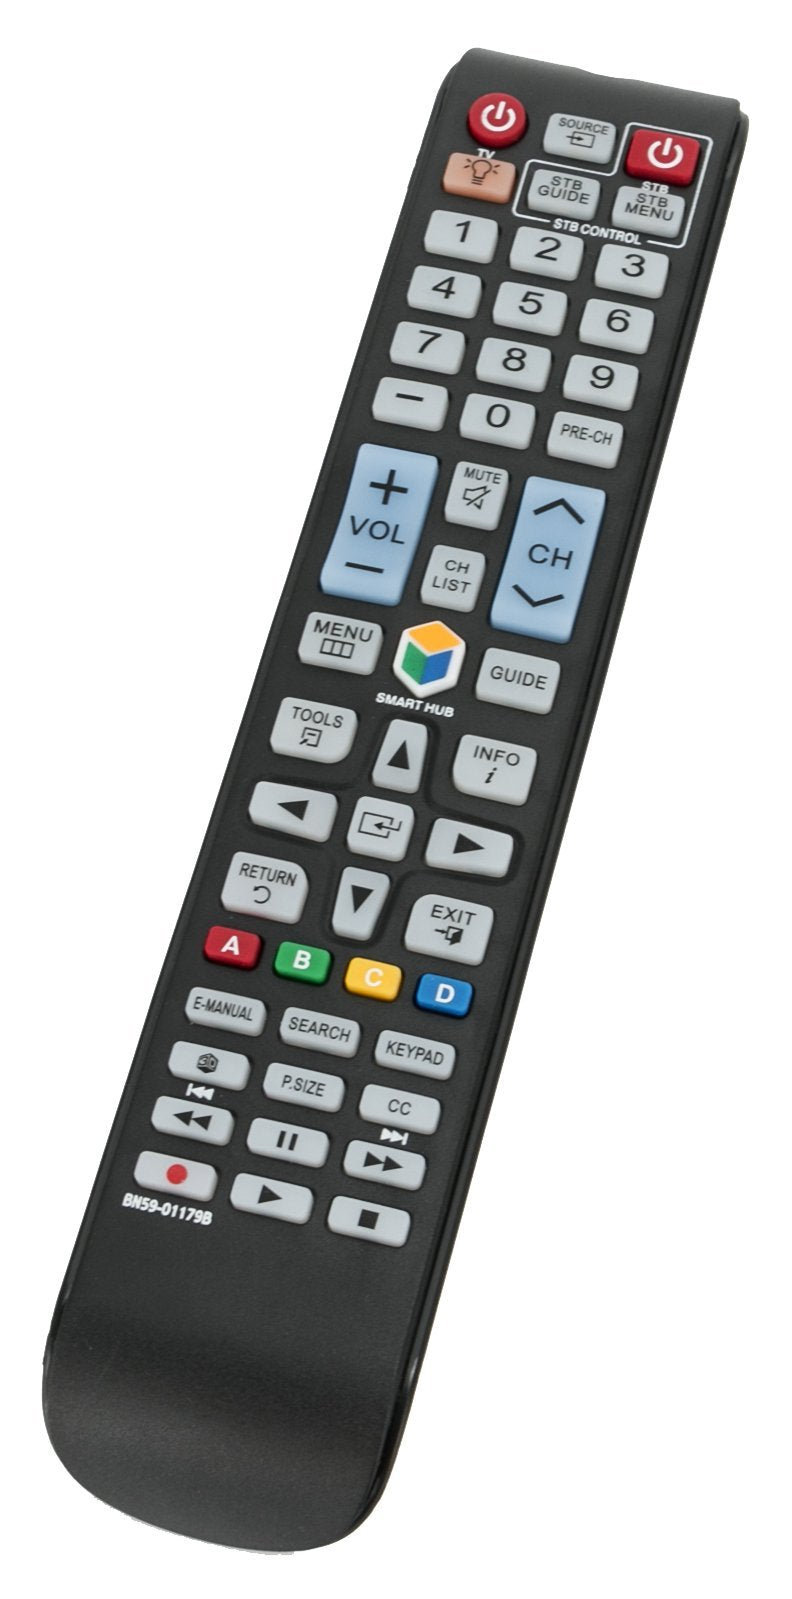 New Replace Remote BN59-01179B for Samsung 3D TV UN65H8000AF UN65HU8500F UN65HU8550F UN46ES7100 UN55ES6820FXZA UN55ES7150F UN55HU9000F UN60ES7150F UN55ES7003F UN55ES6900